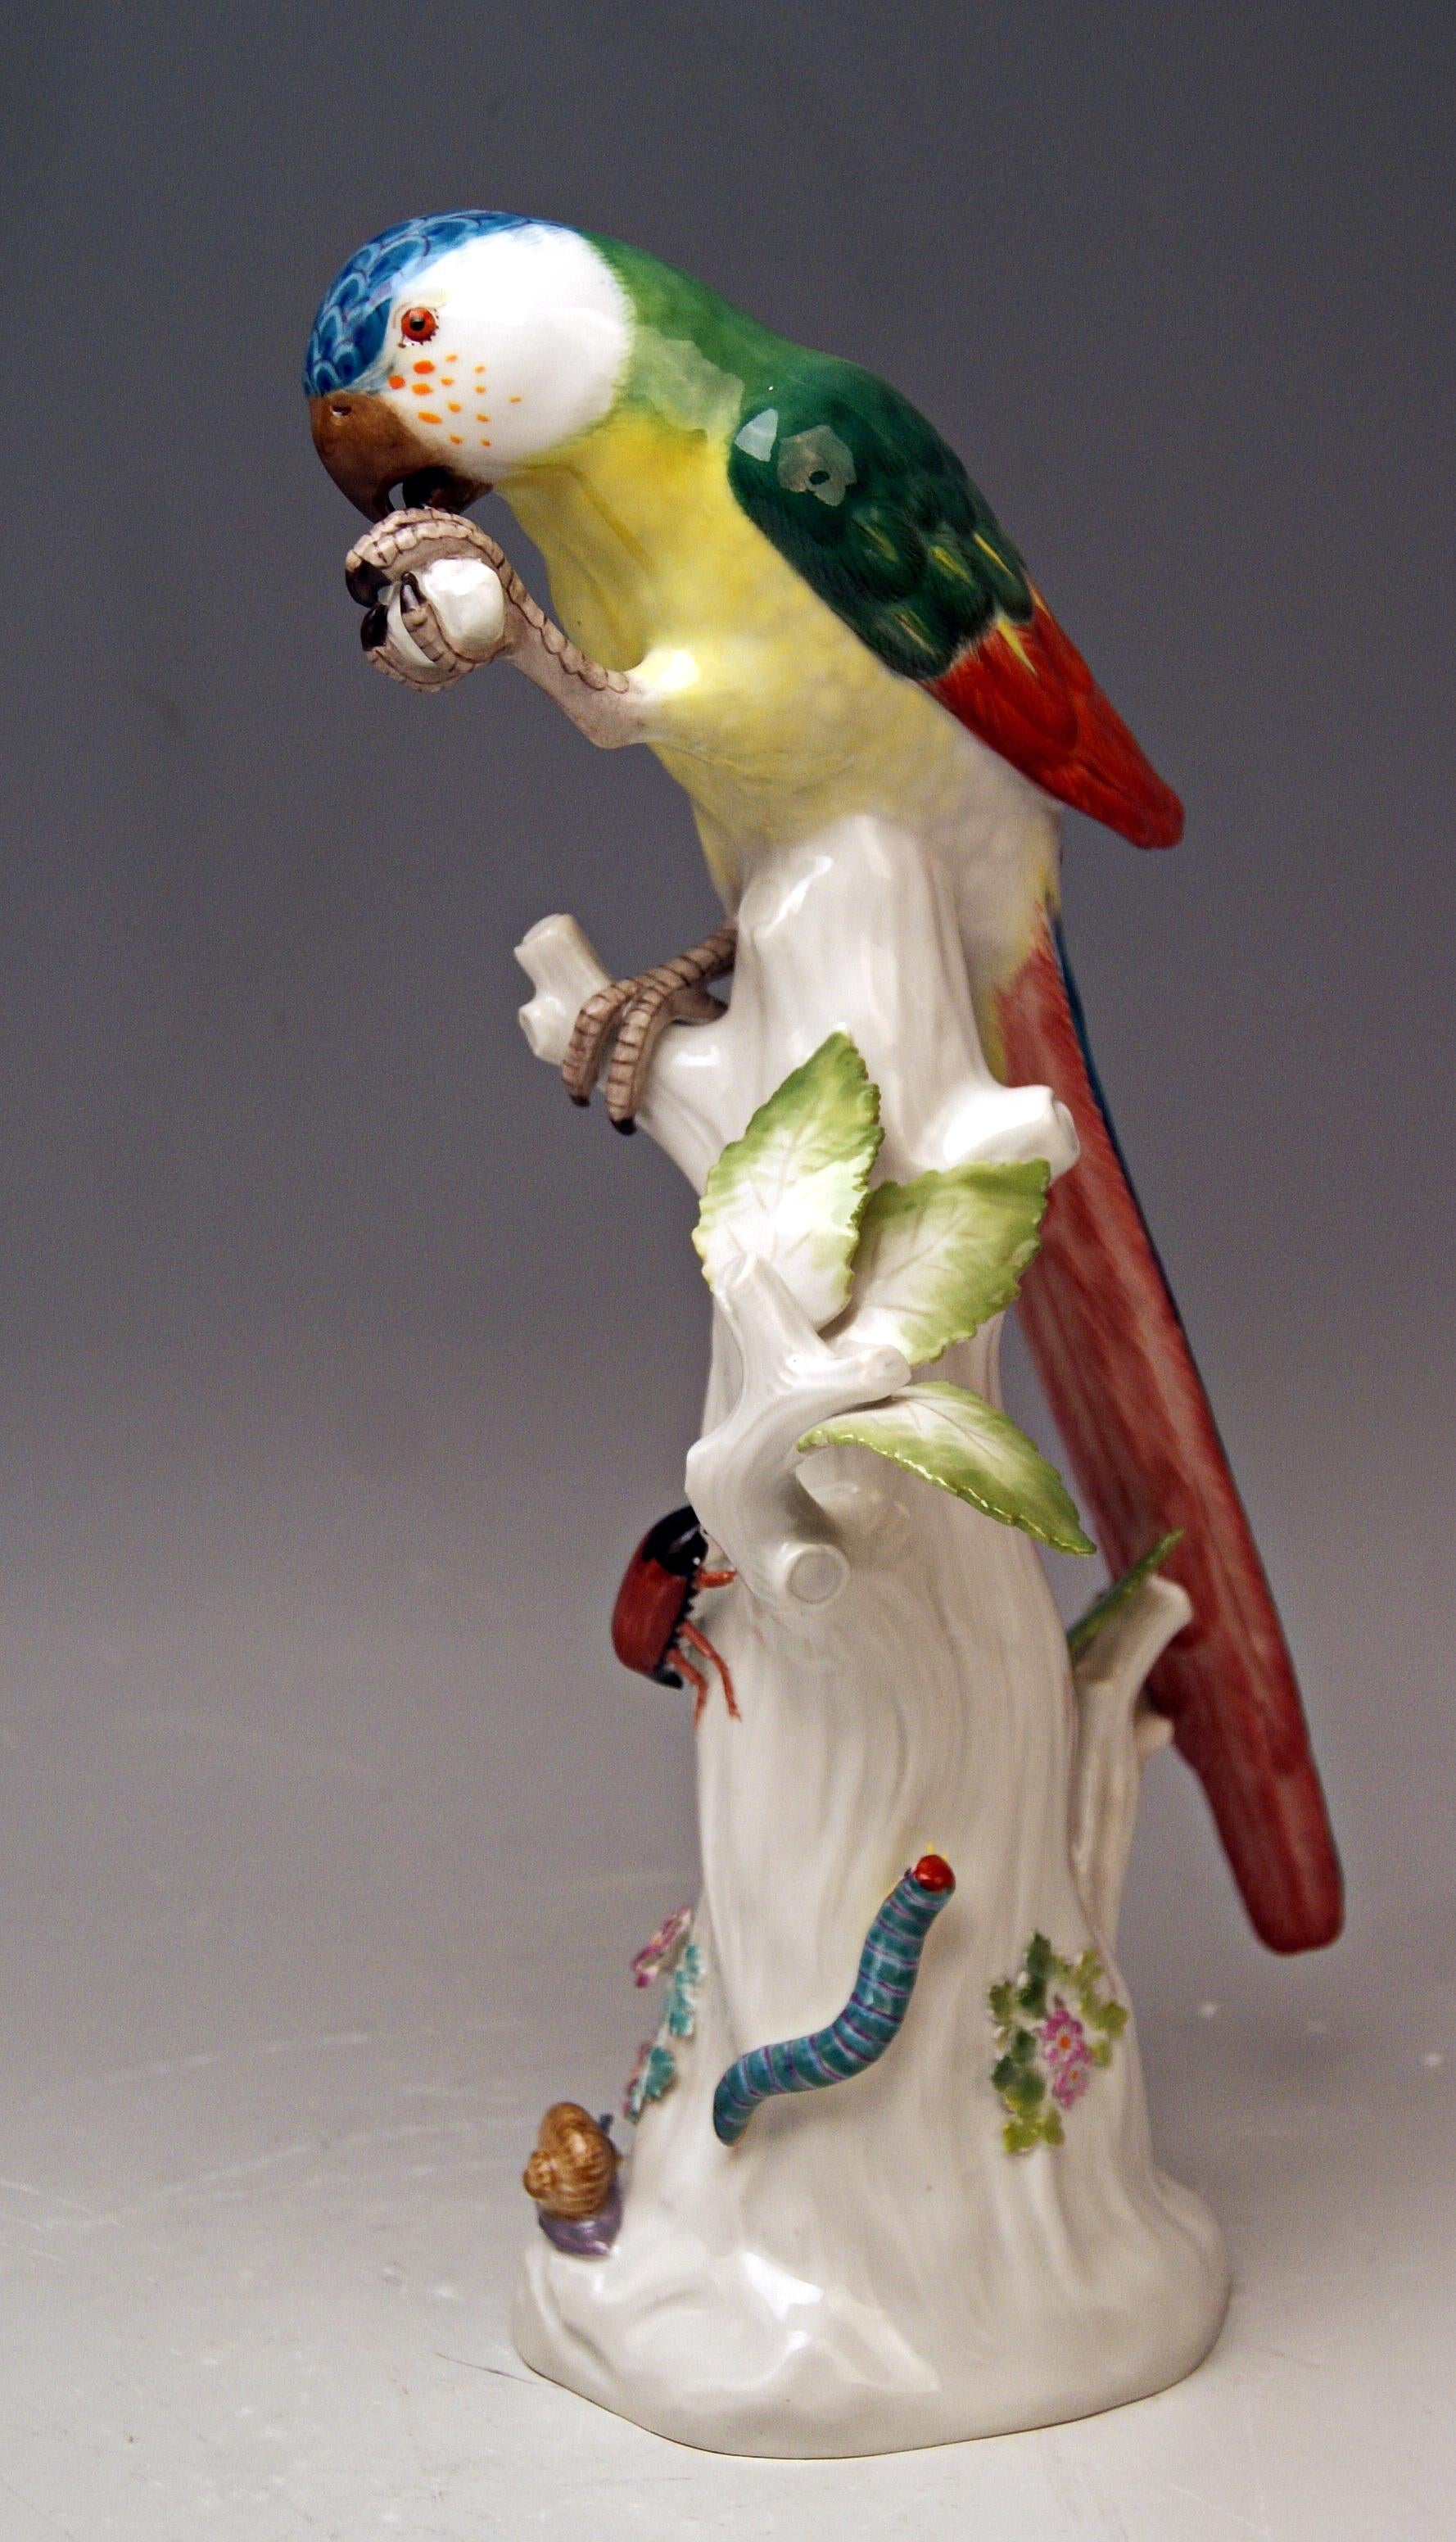 Animal Figurine:  Parrot situated on a tree's stump with cockchafer

Manufactory: Meissen
Hallmarked:  
Blue Meissen Sword Mark of 20th century  (underglazed)
model number 20x  /  former's number 104
FIRST QUALITY    
Dating:    made 1956   (year's